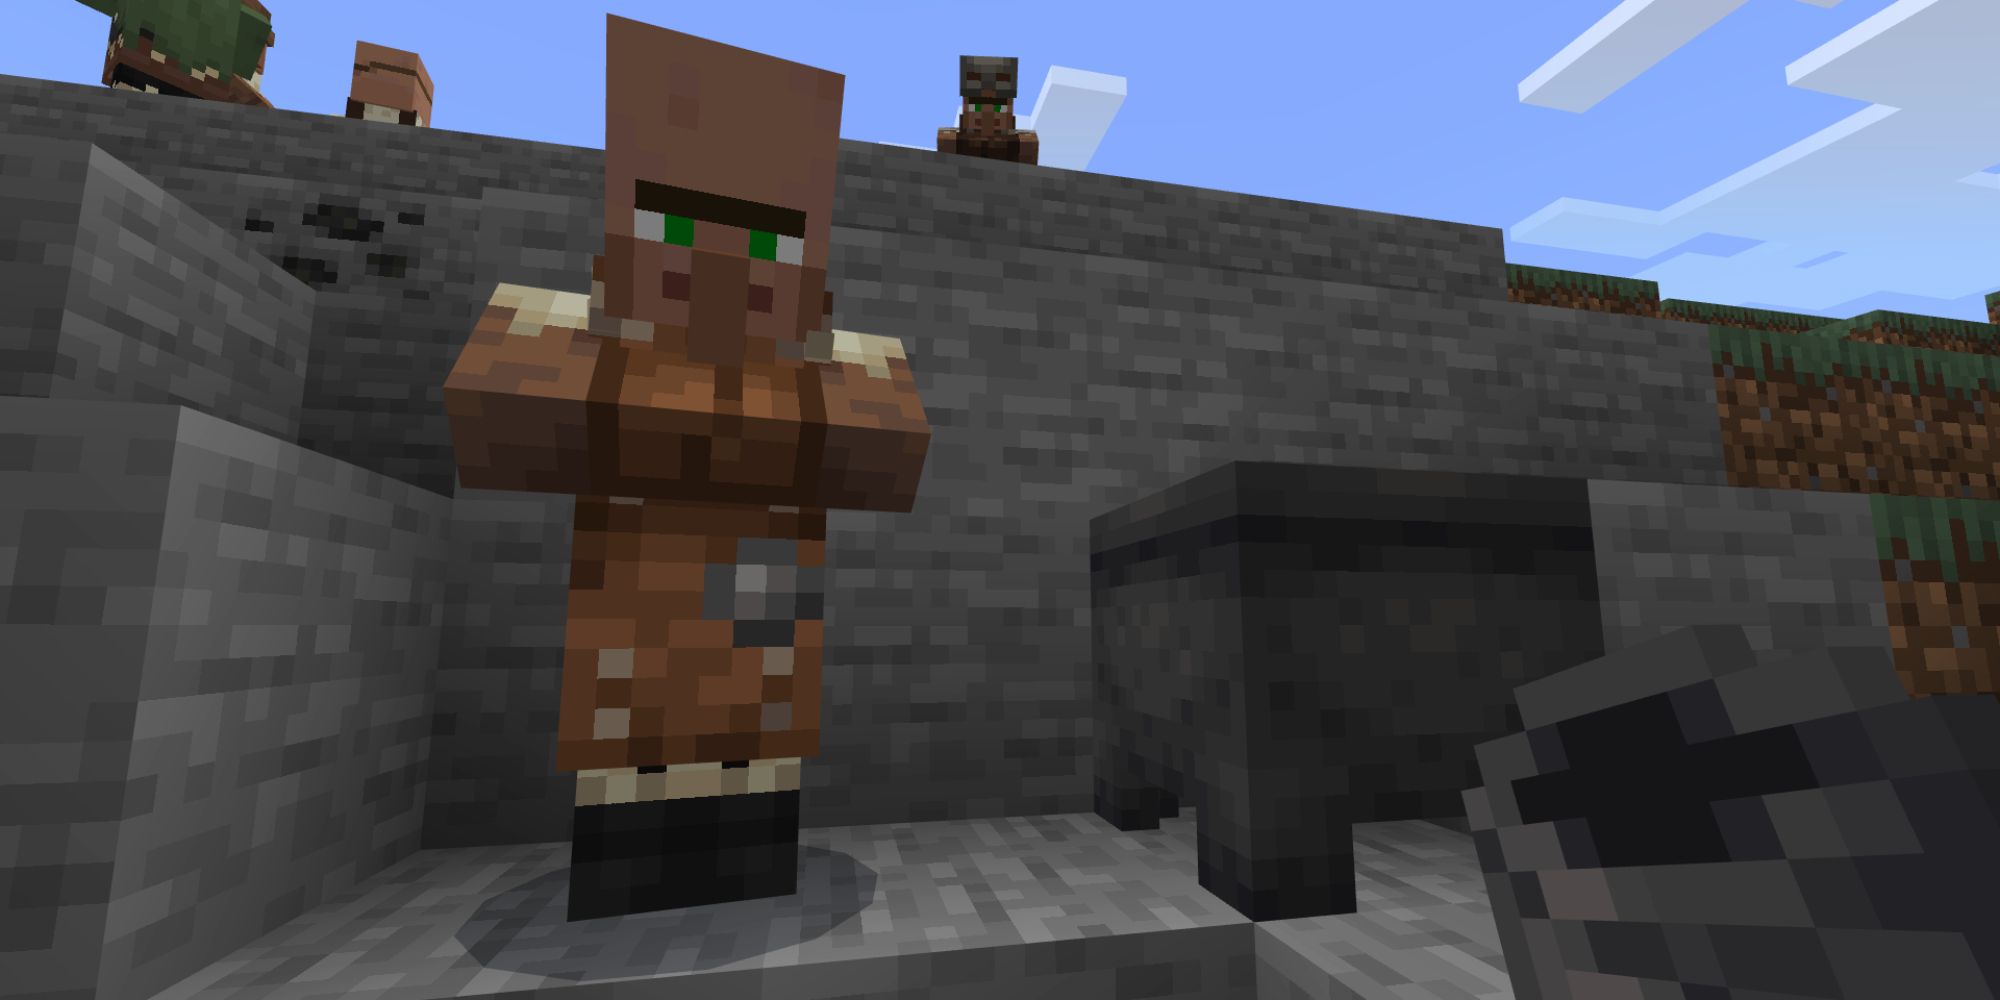 Minecraft: Every Trading Villager, Ranked